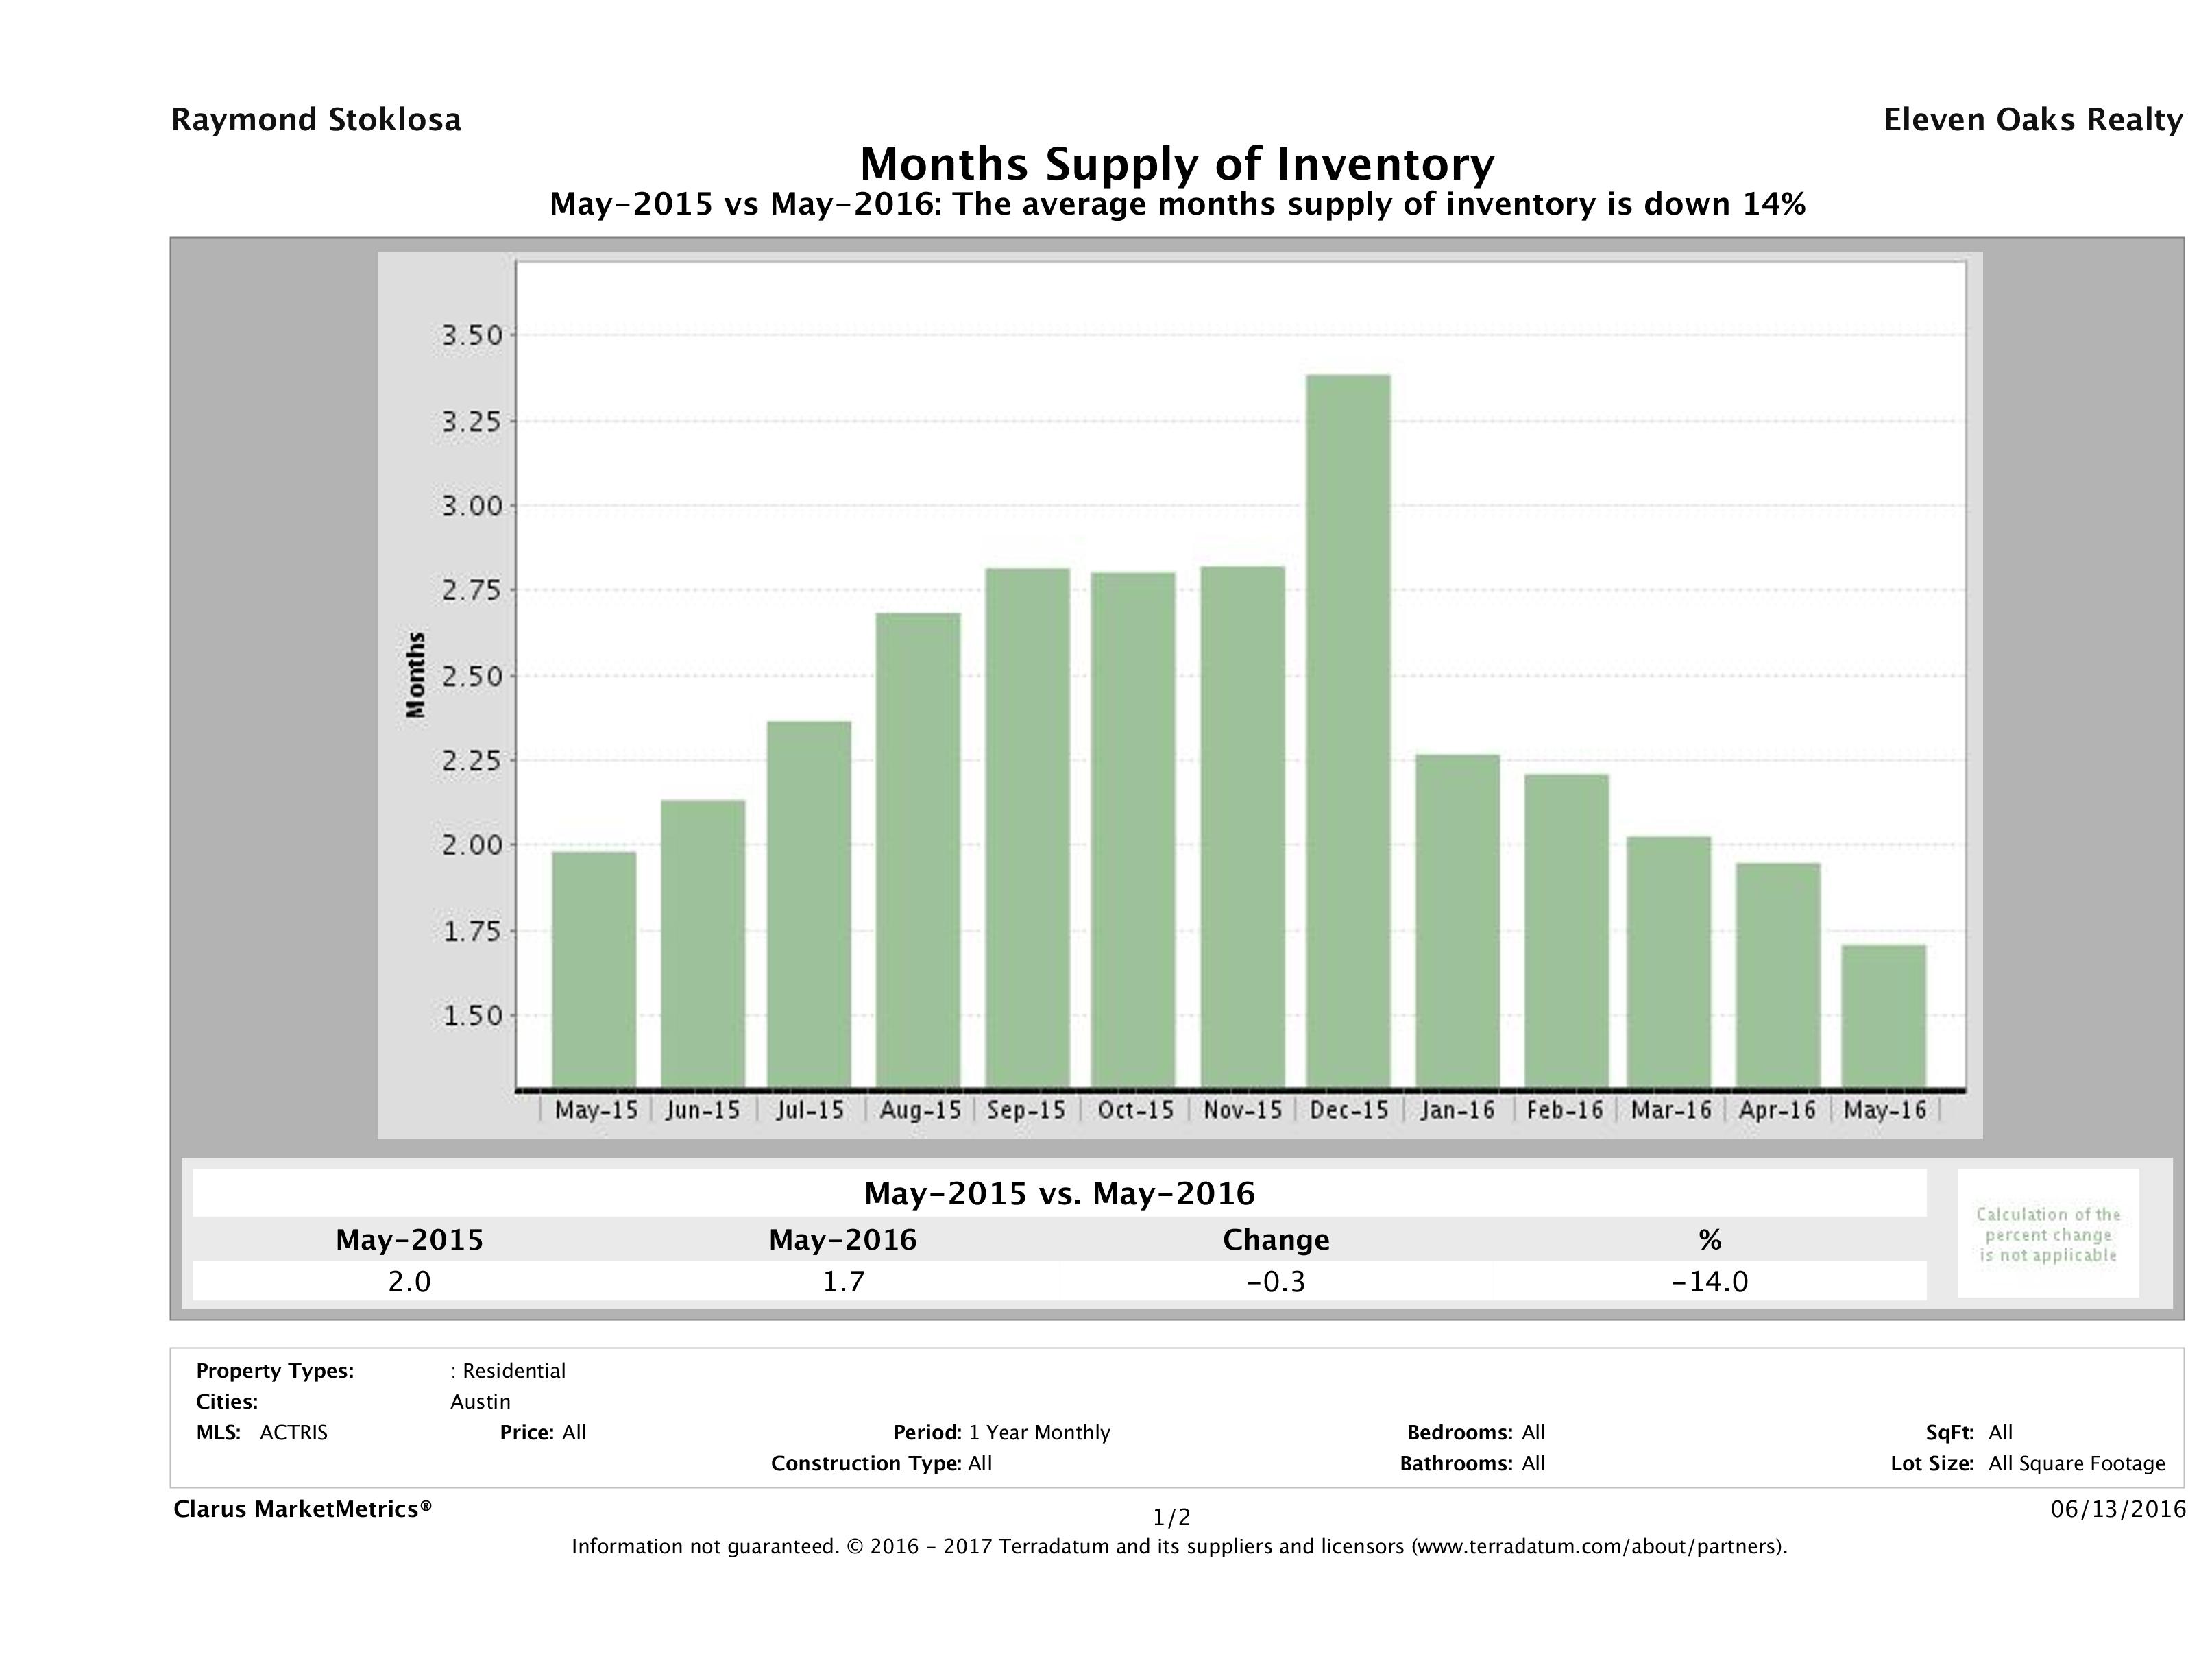 Austin single family home months inventory May 2016